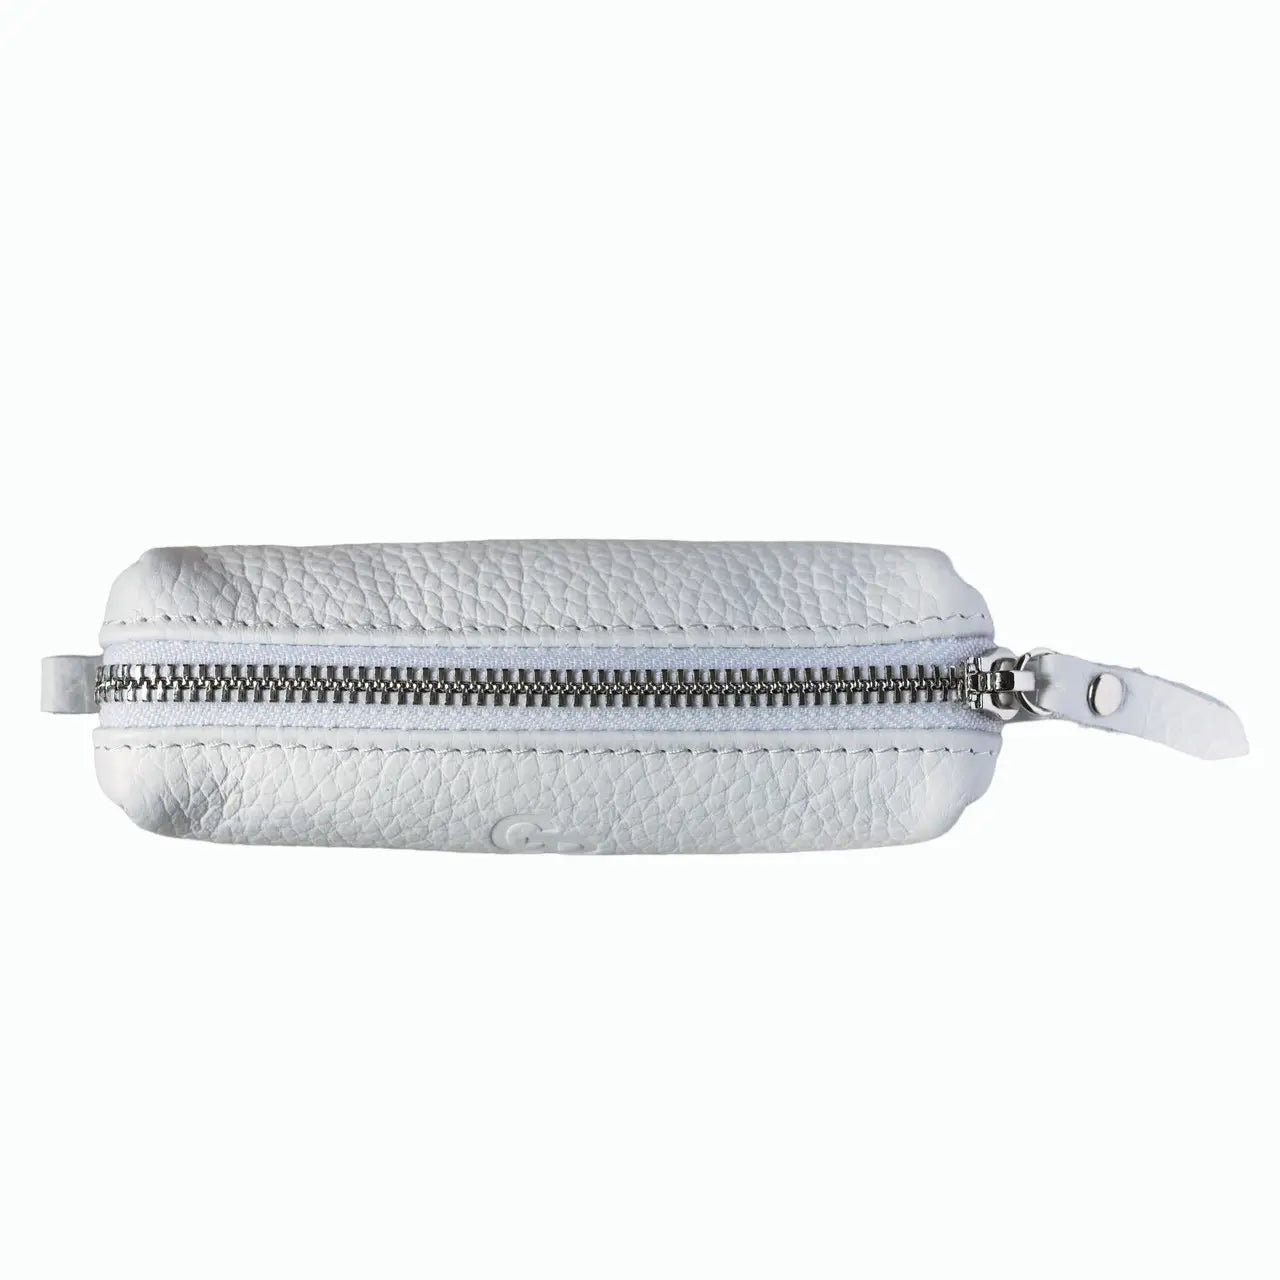 Key Holder Case in white color, crafted from timeless leather 